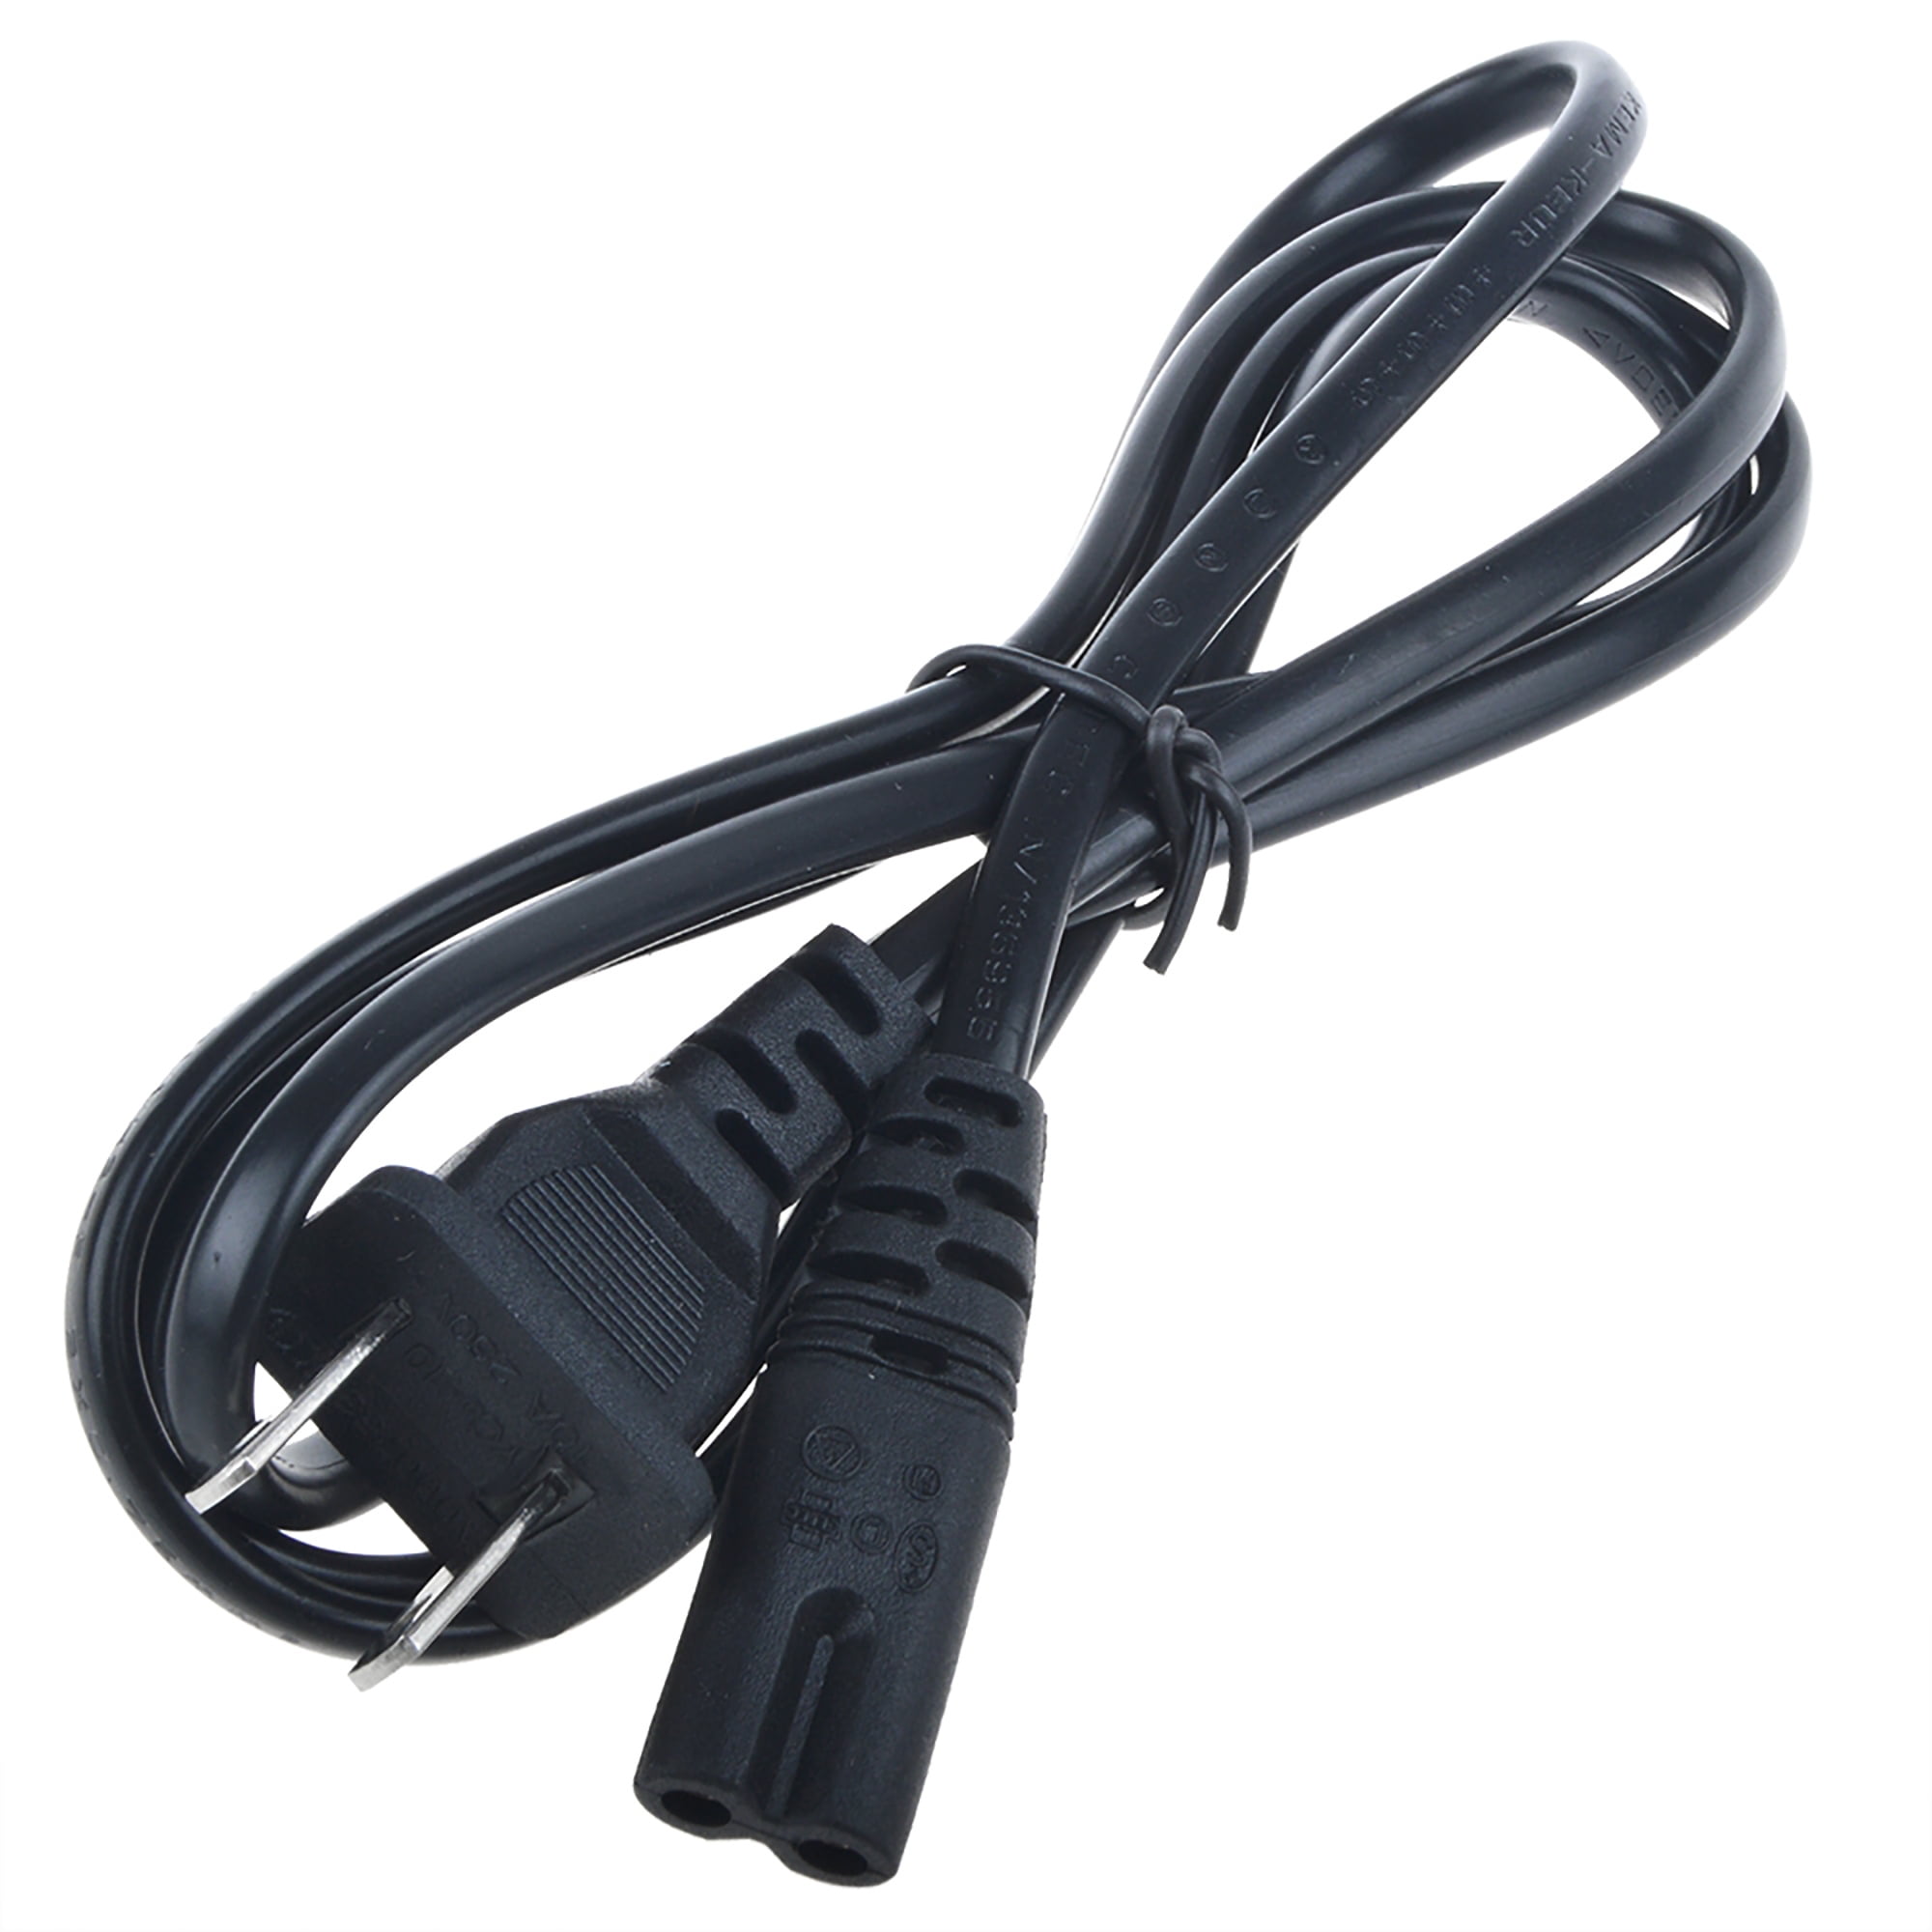 PKPOWER 5ft AC Power Cord Cable For HP DeskJet Plus 4152 4155 4158 Printer  2-Prong Lead 